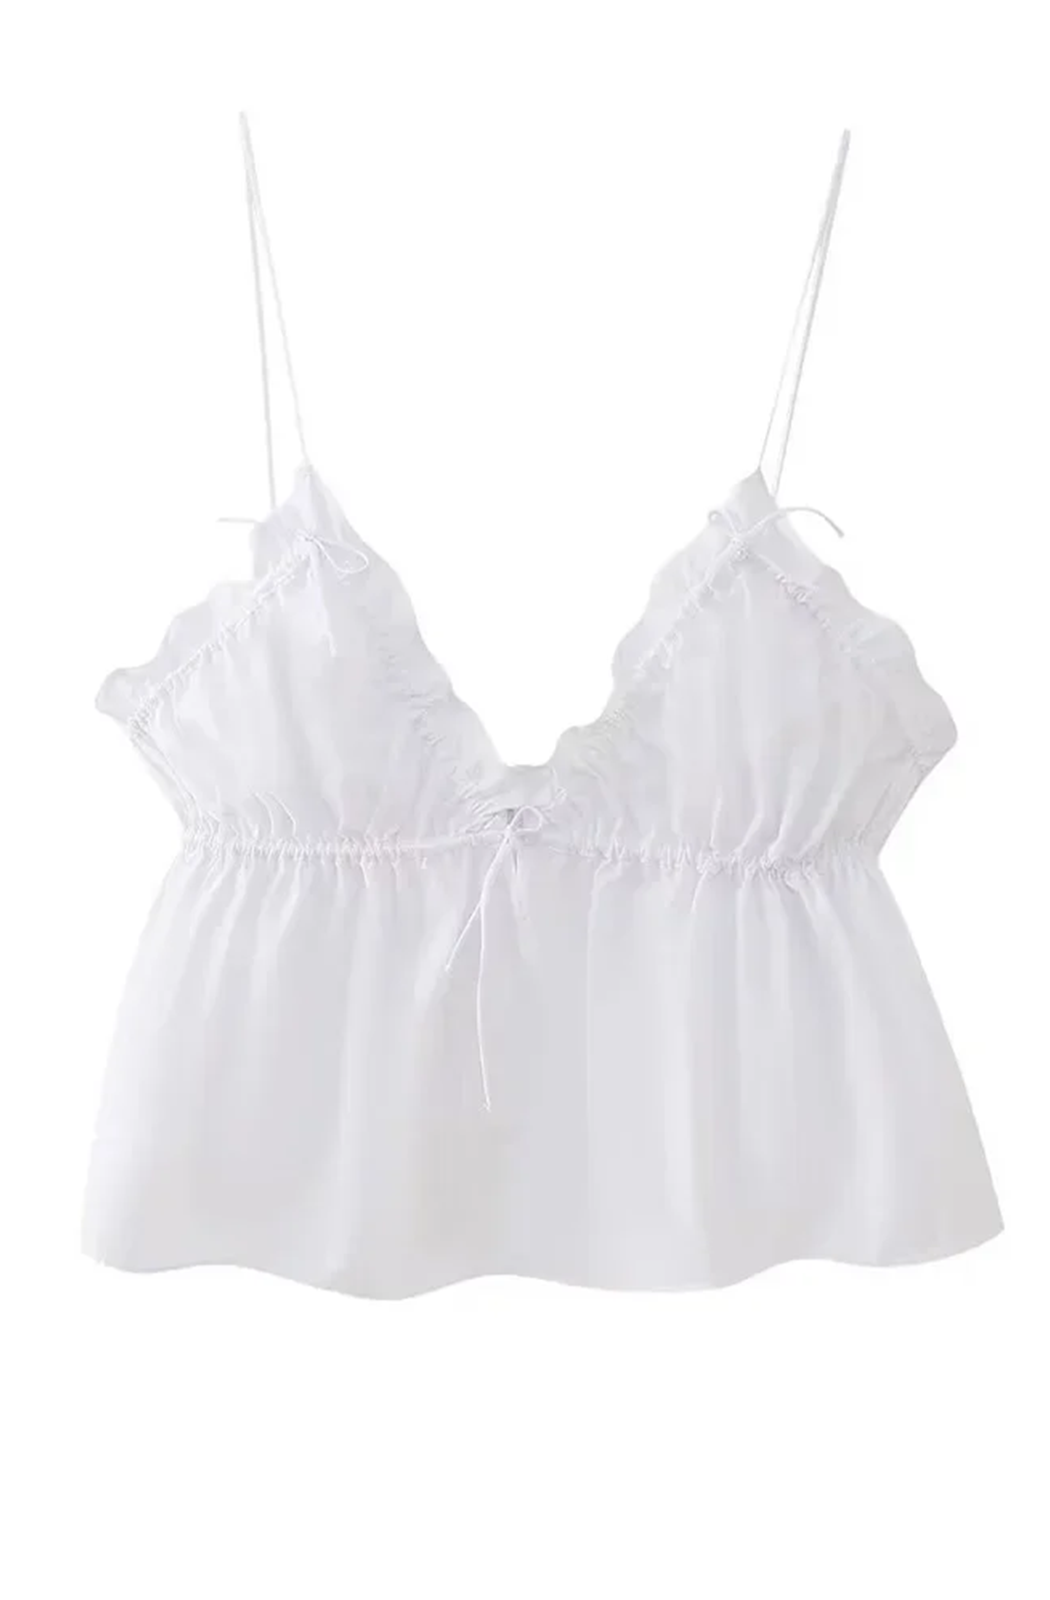 Ruffle crop top with thin straps